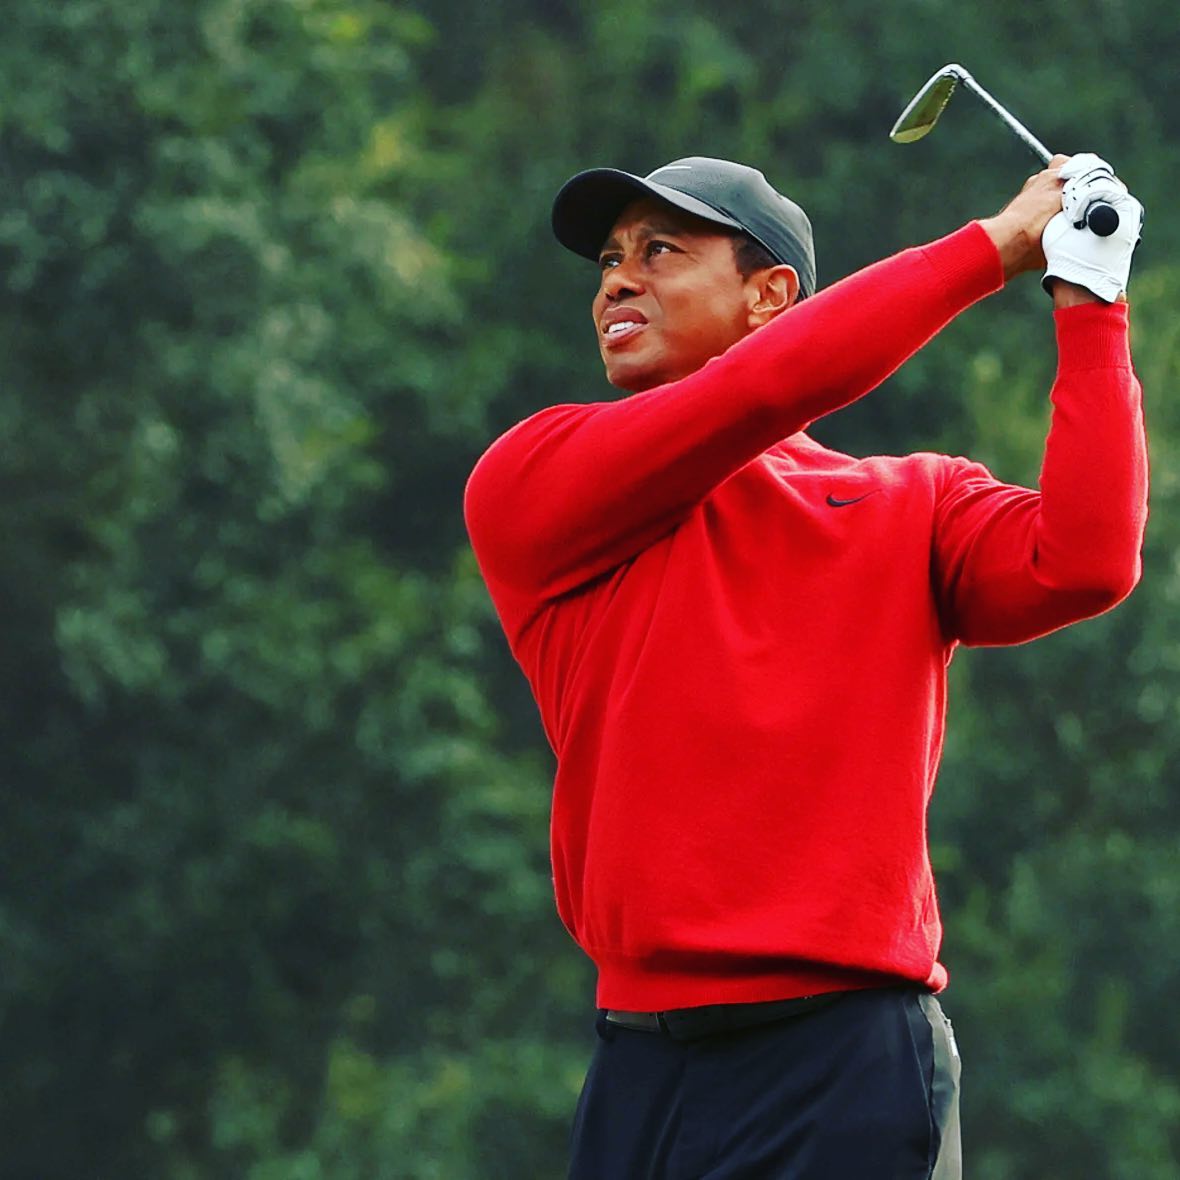 Live coverage of Tiger Woods starts at 1pm